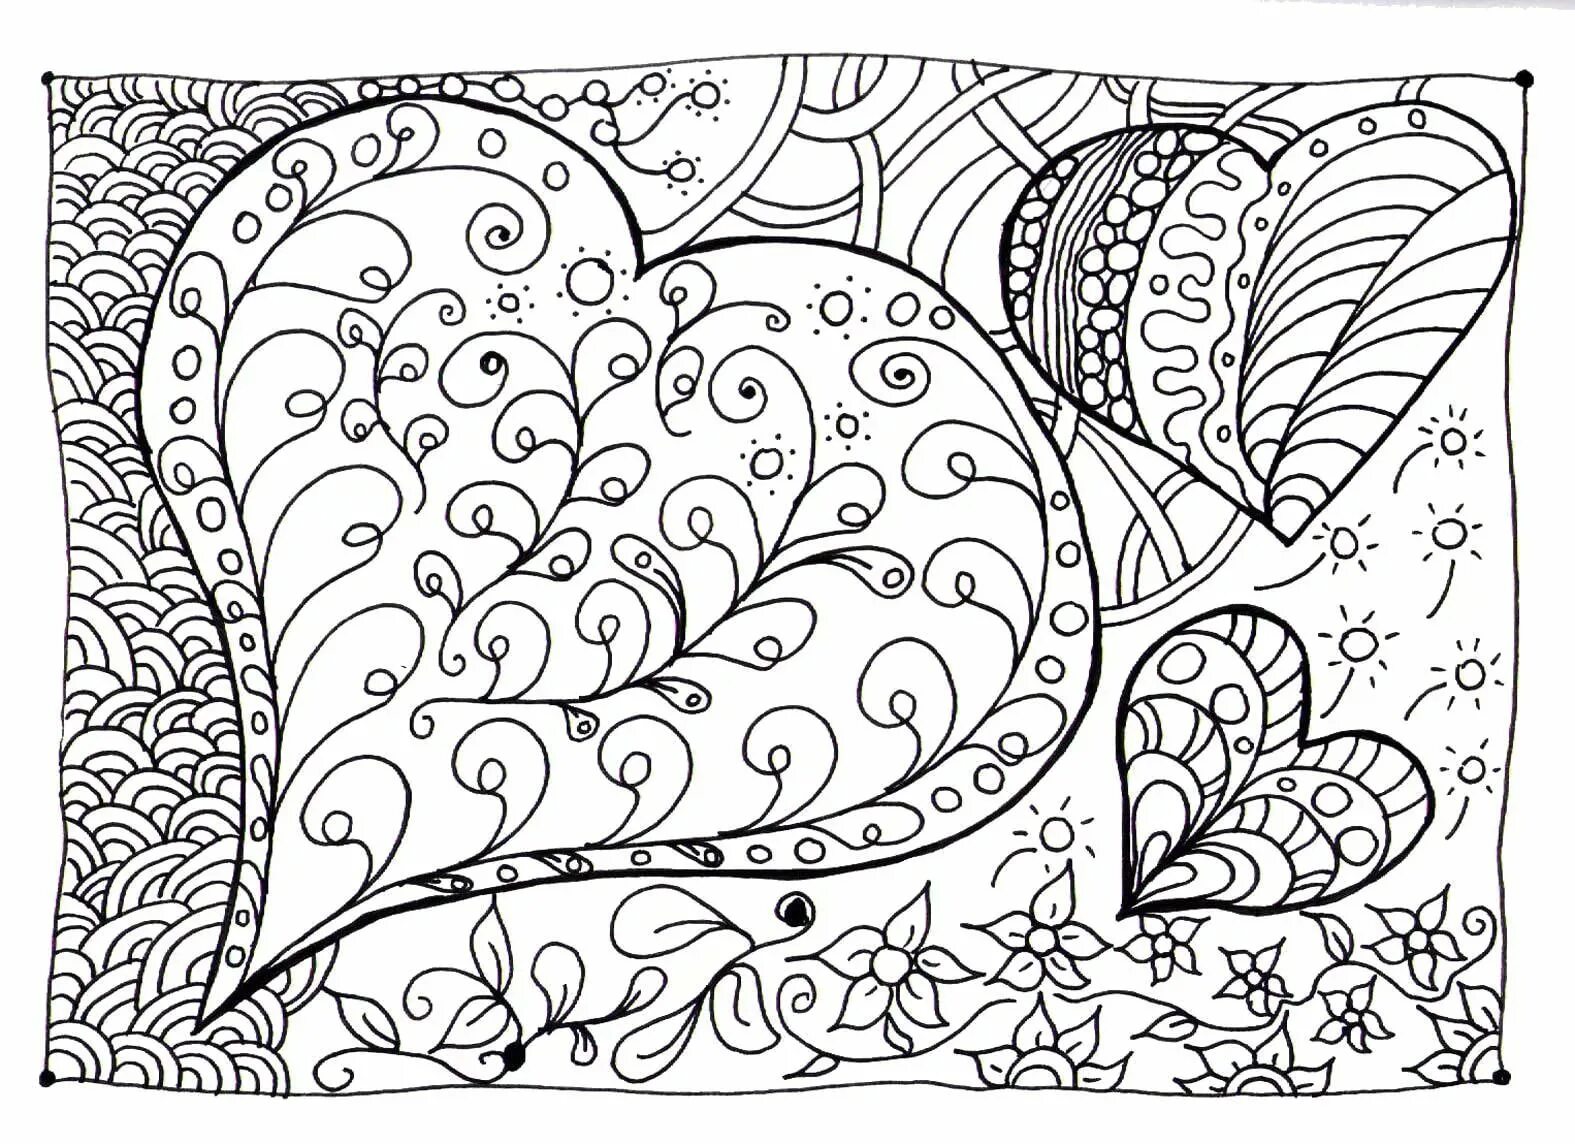 Radiantly coloring page heavy beautiful